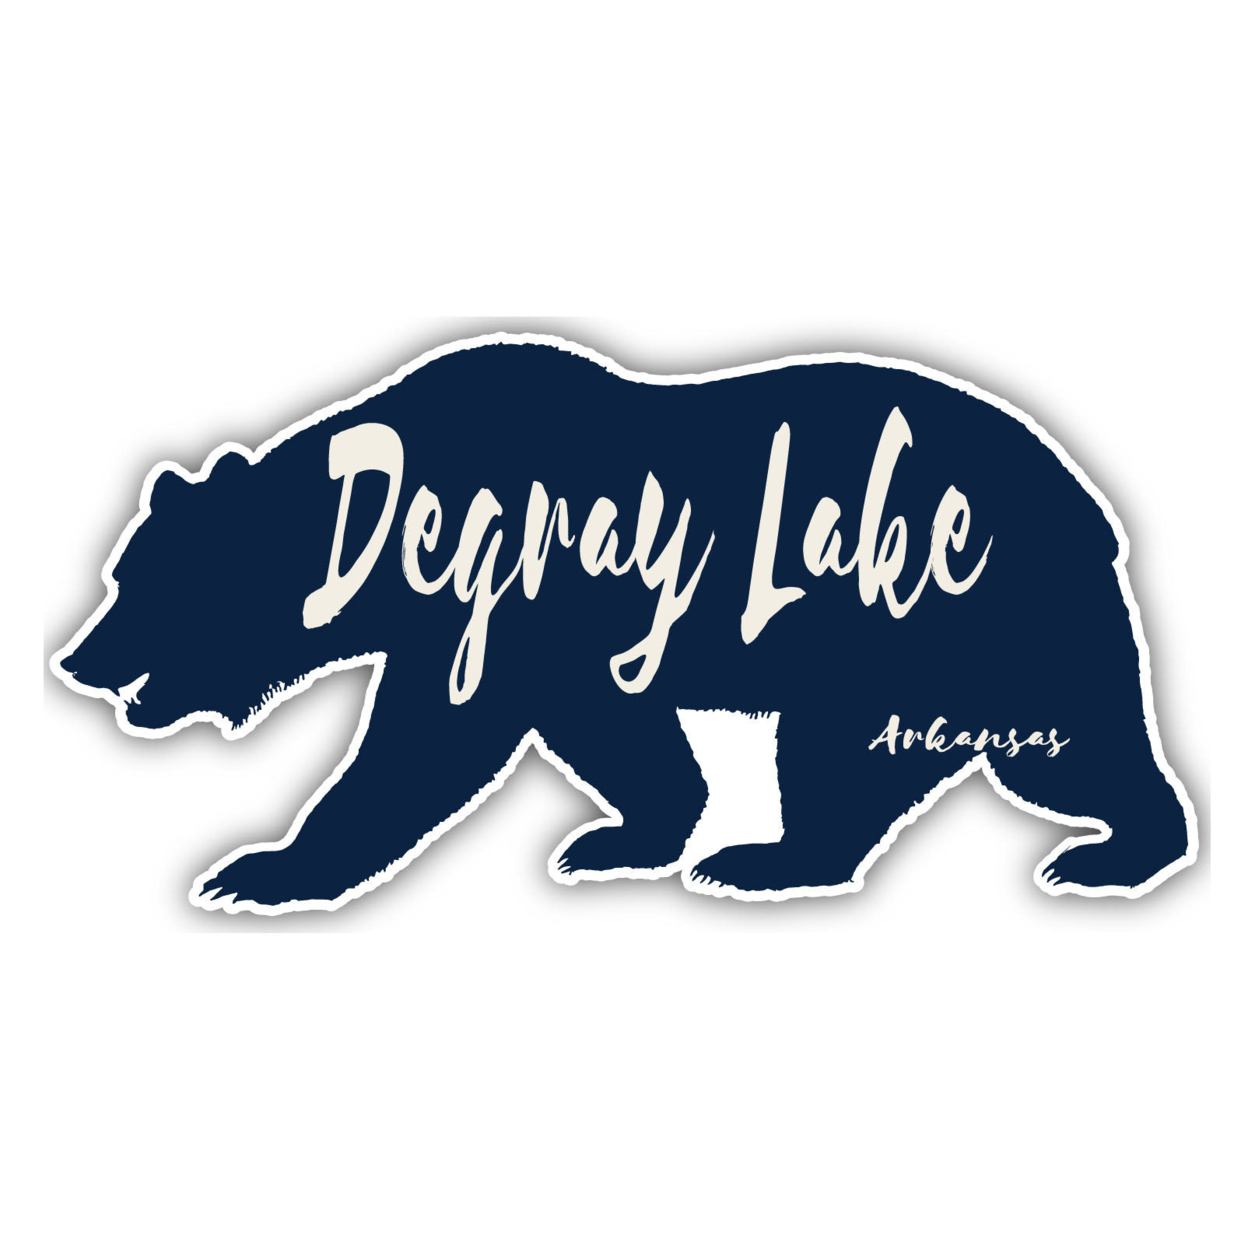 DeGray Lake Arkansas Souvenir Decorative Stickers (Choose Theme And Size) - 4-Pack, 6-Inch, Camp Life